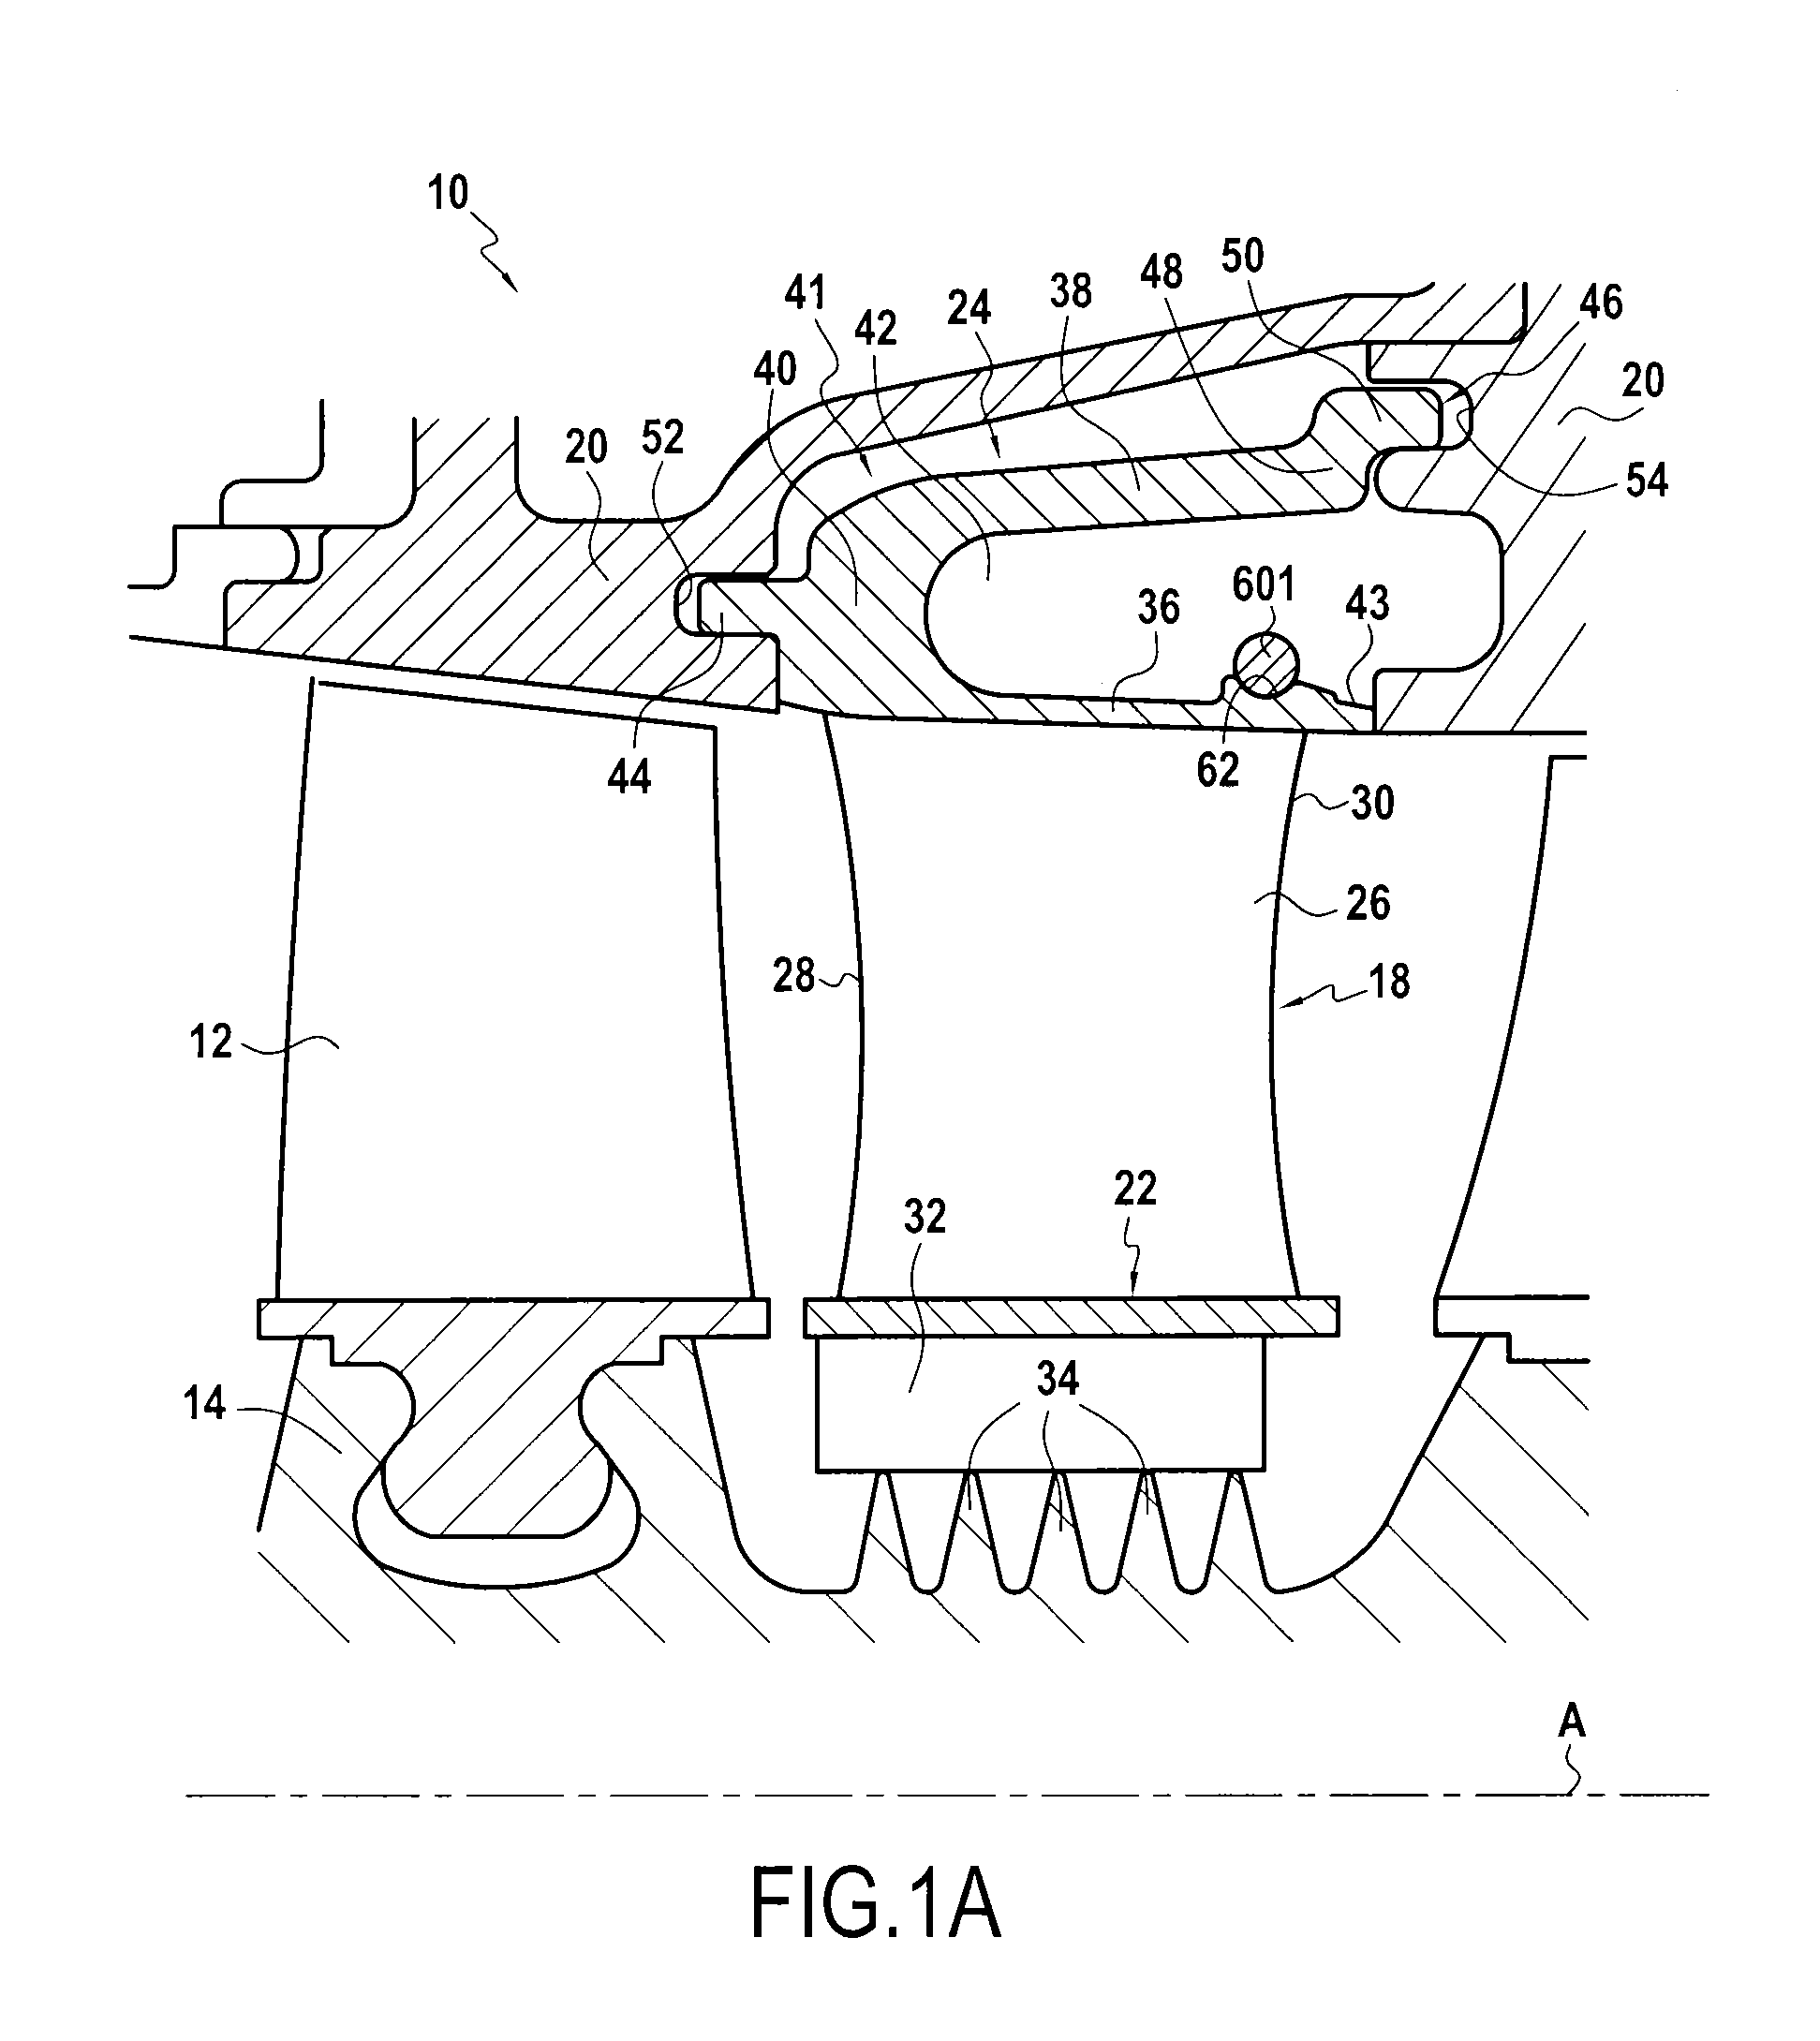 Angular sector of a stator for a turbine engine compressor, a turbine engine stator, and a turbine engine including such a sector